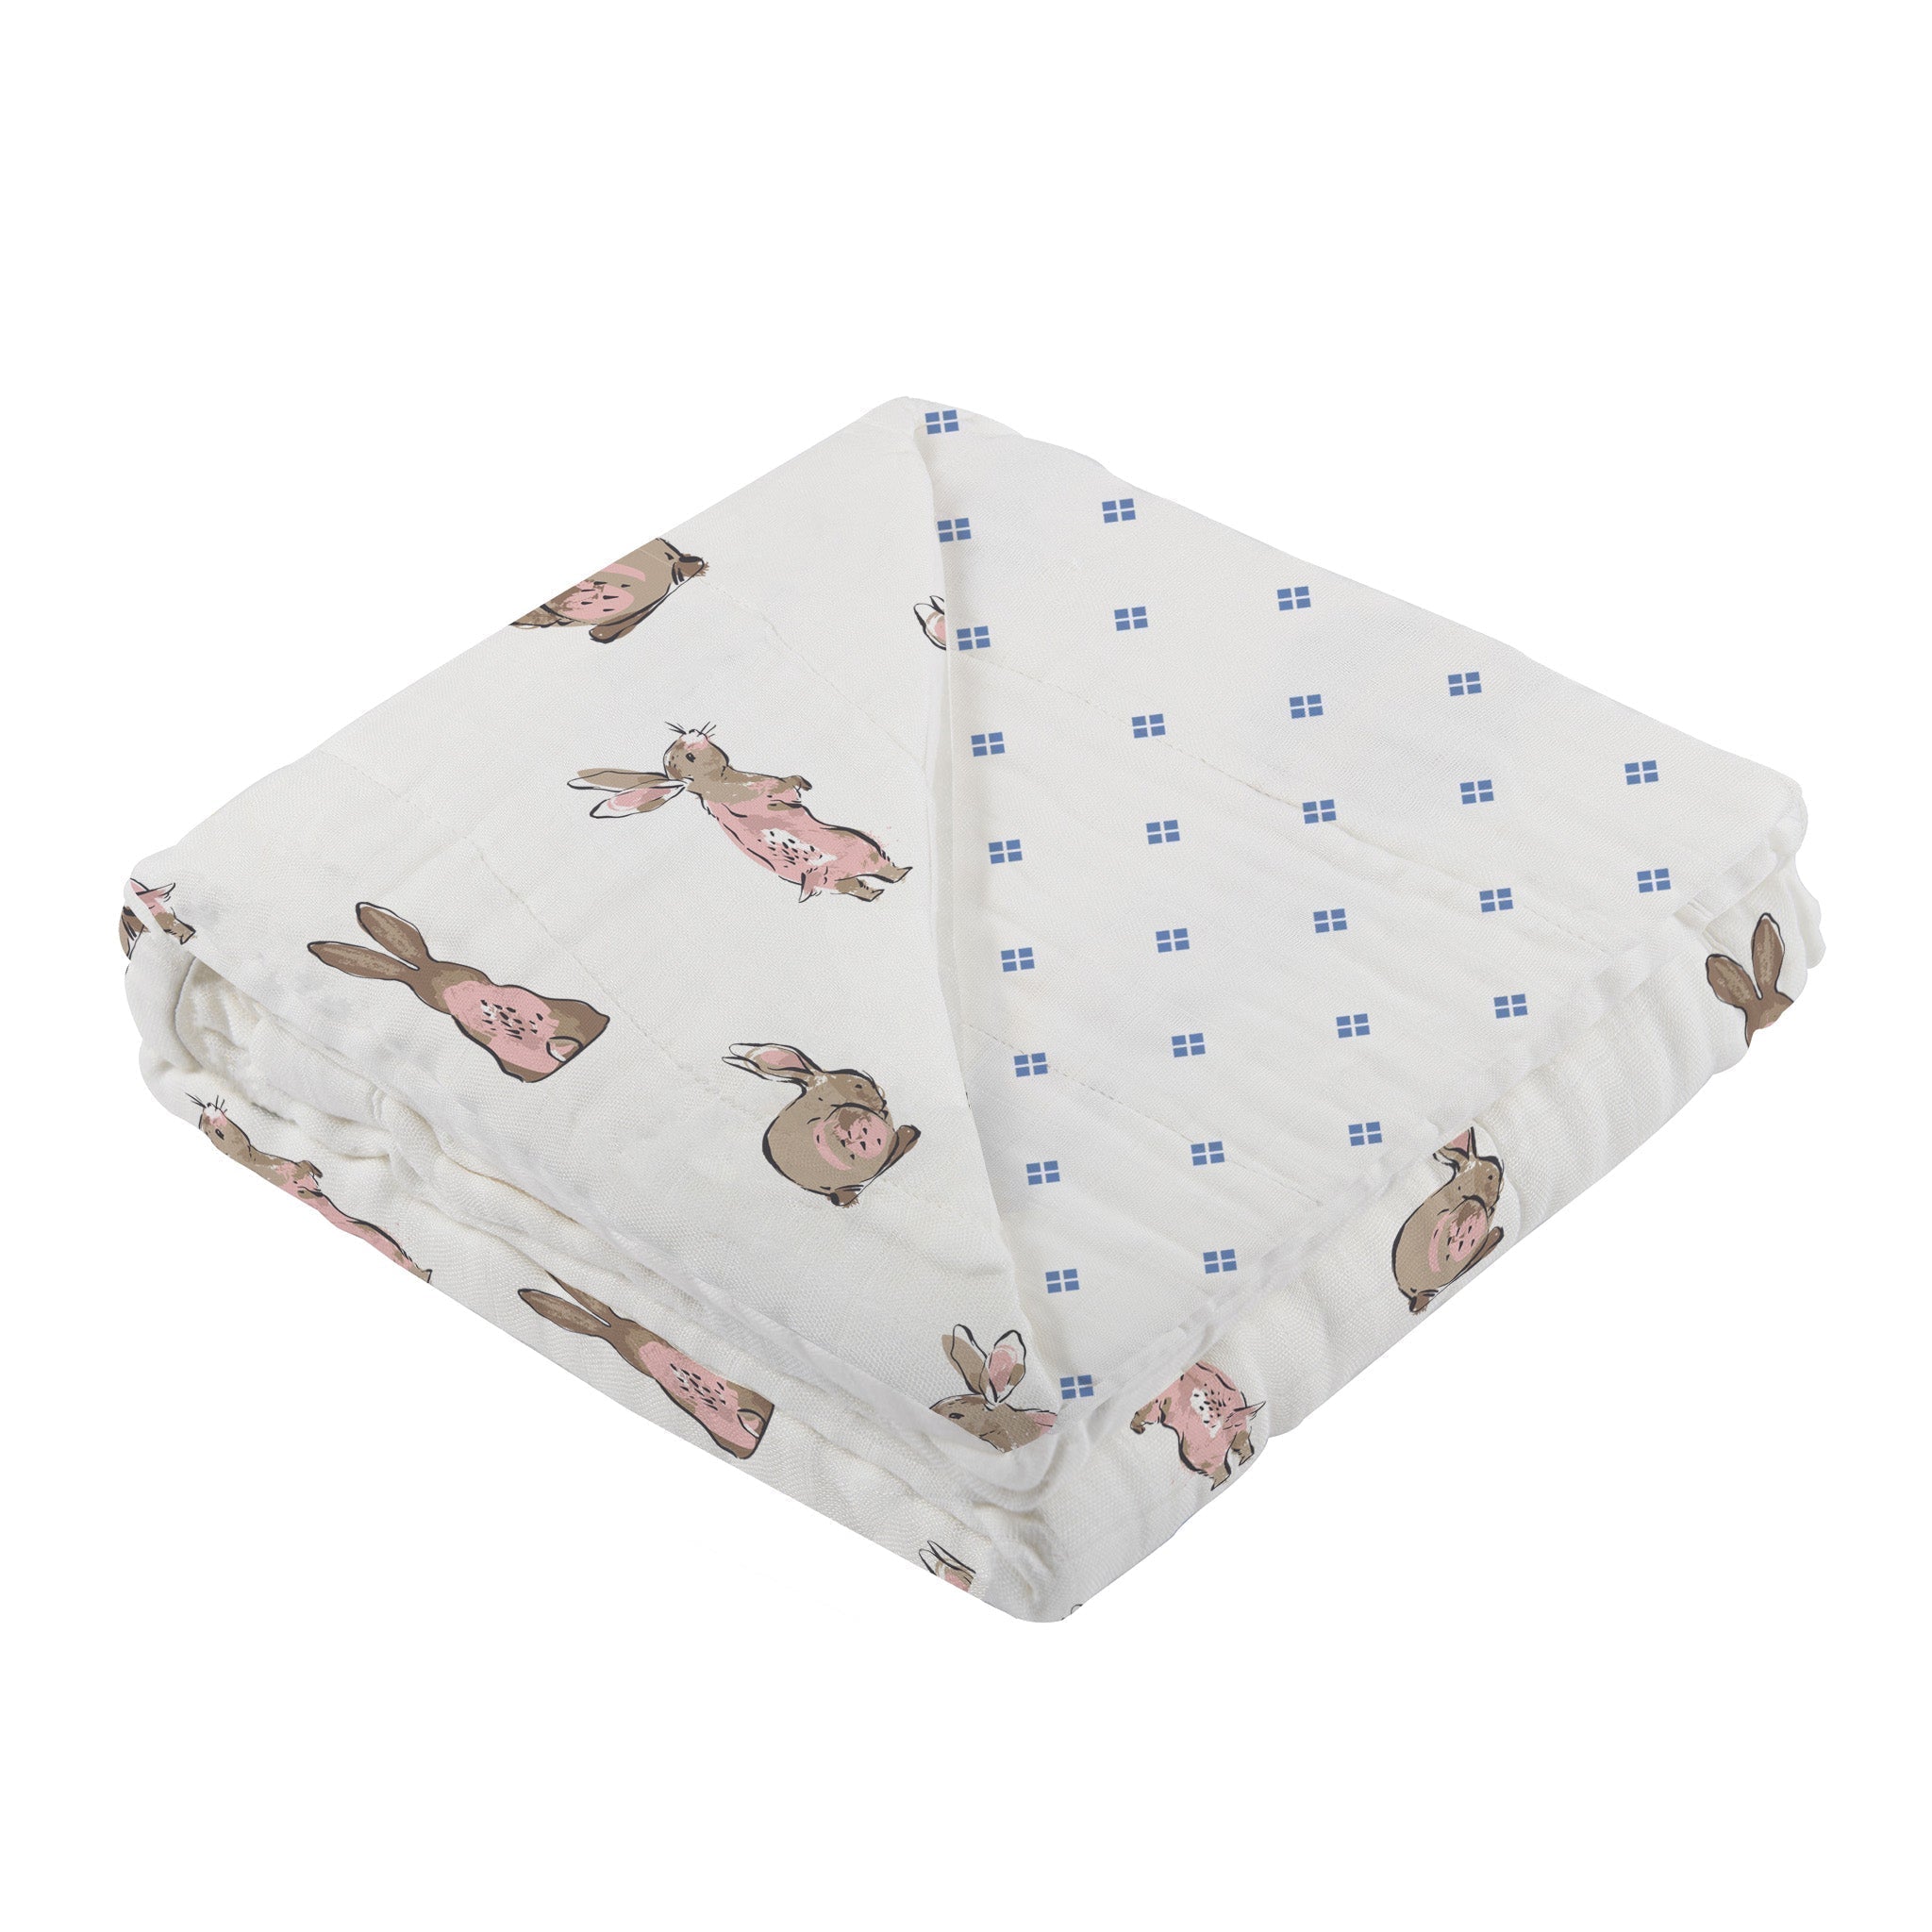 Baby blanket with images of bunnies